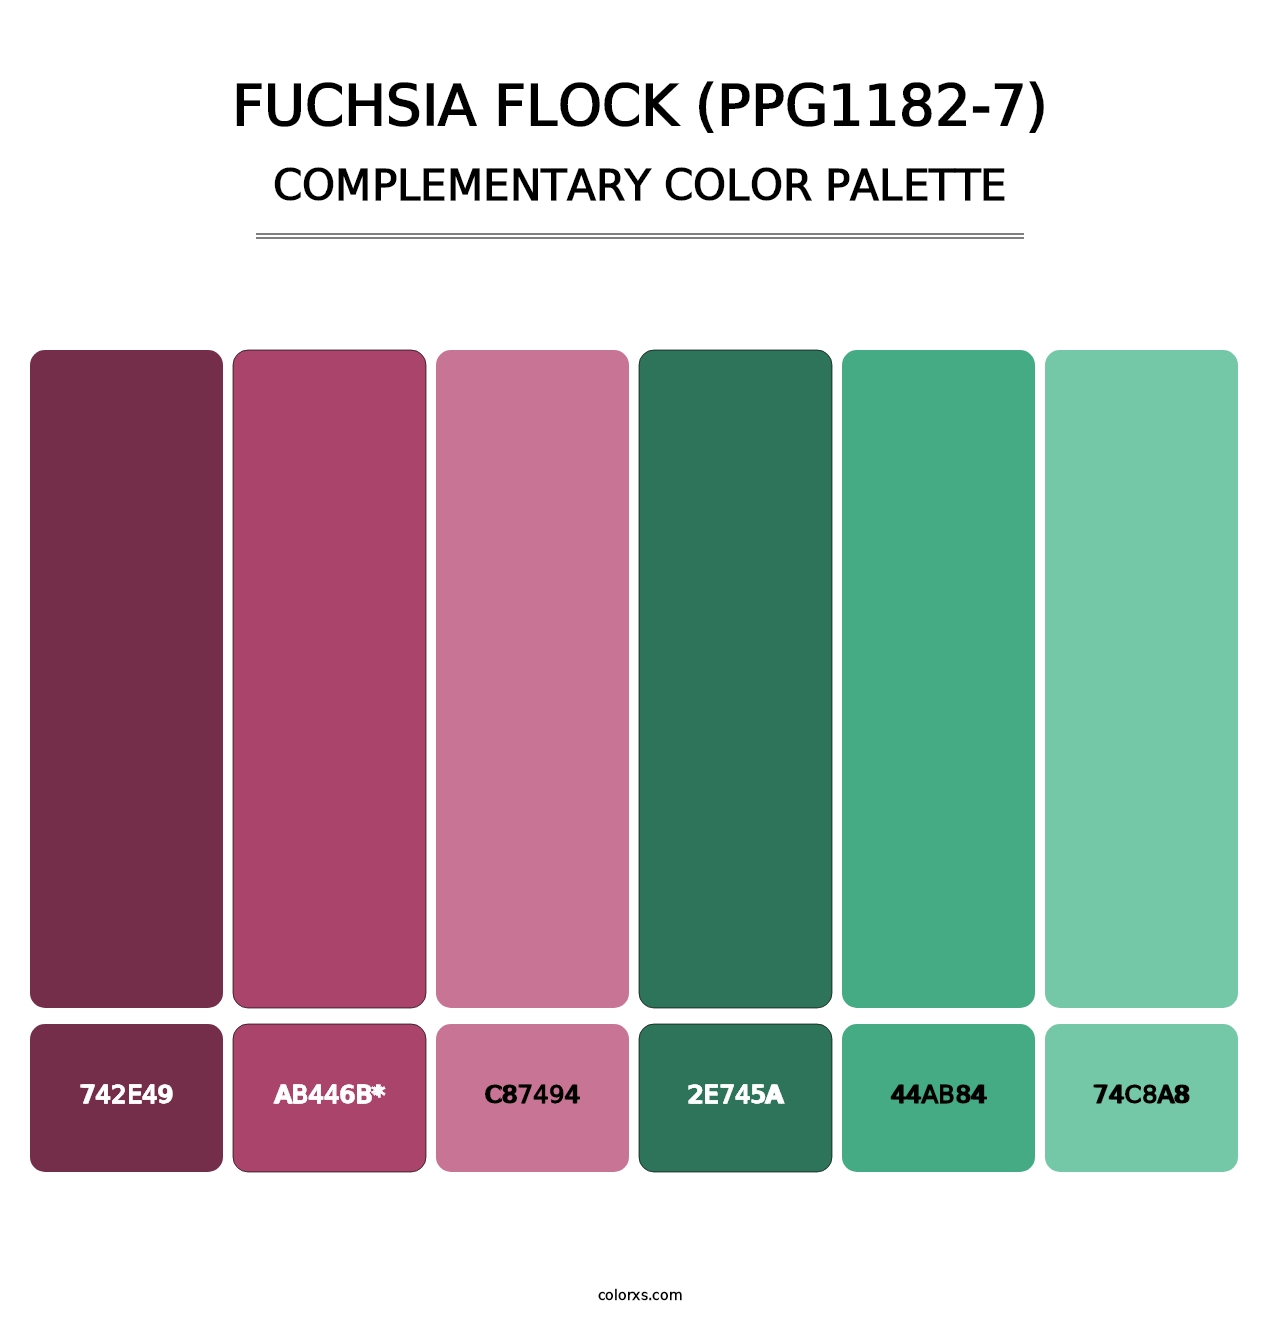 Fuchsia Flock (PPG1182-7) - Complementary Color Palette